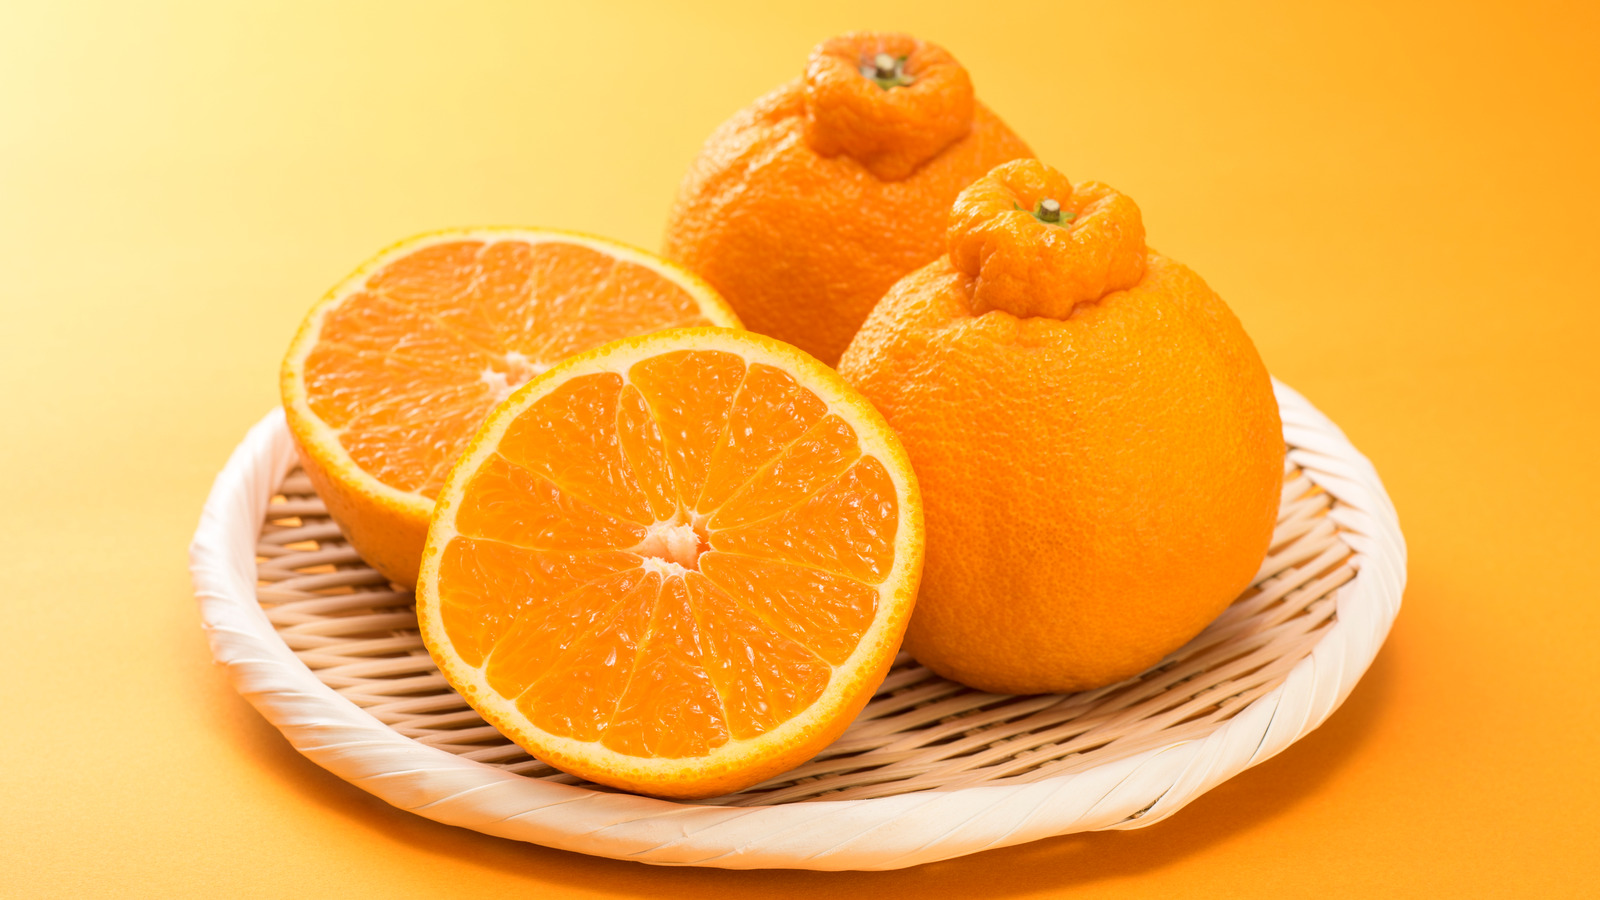 https://www.mashed.com/img/gallery/why-tiktok-is-running-to-try-trader-joes-sumo-oranges/l-intro-1648070341.jpg